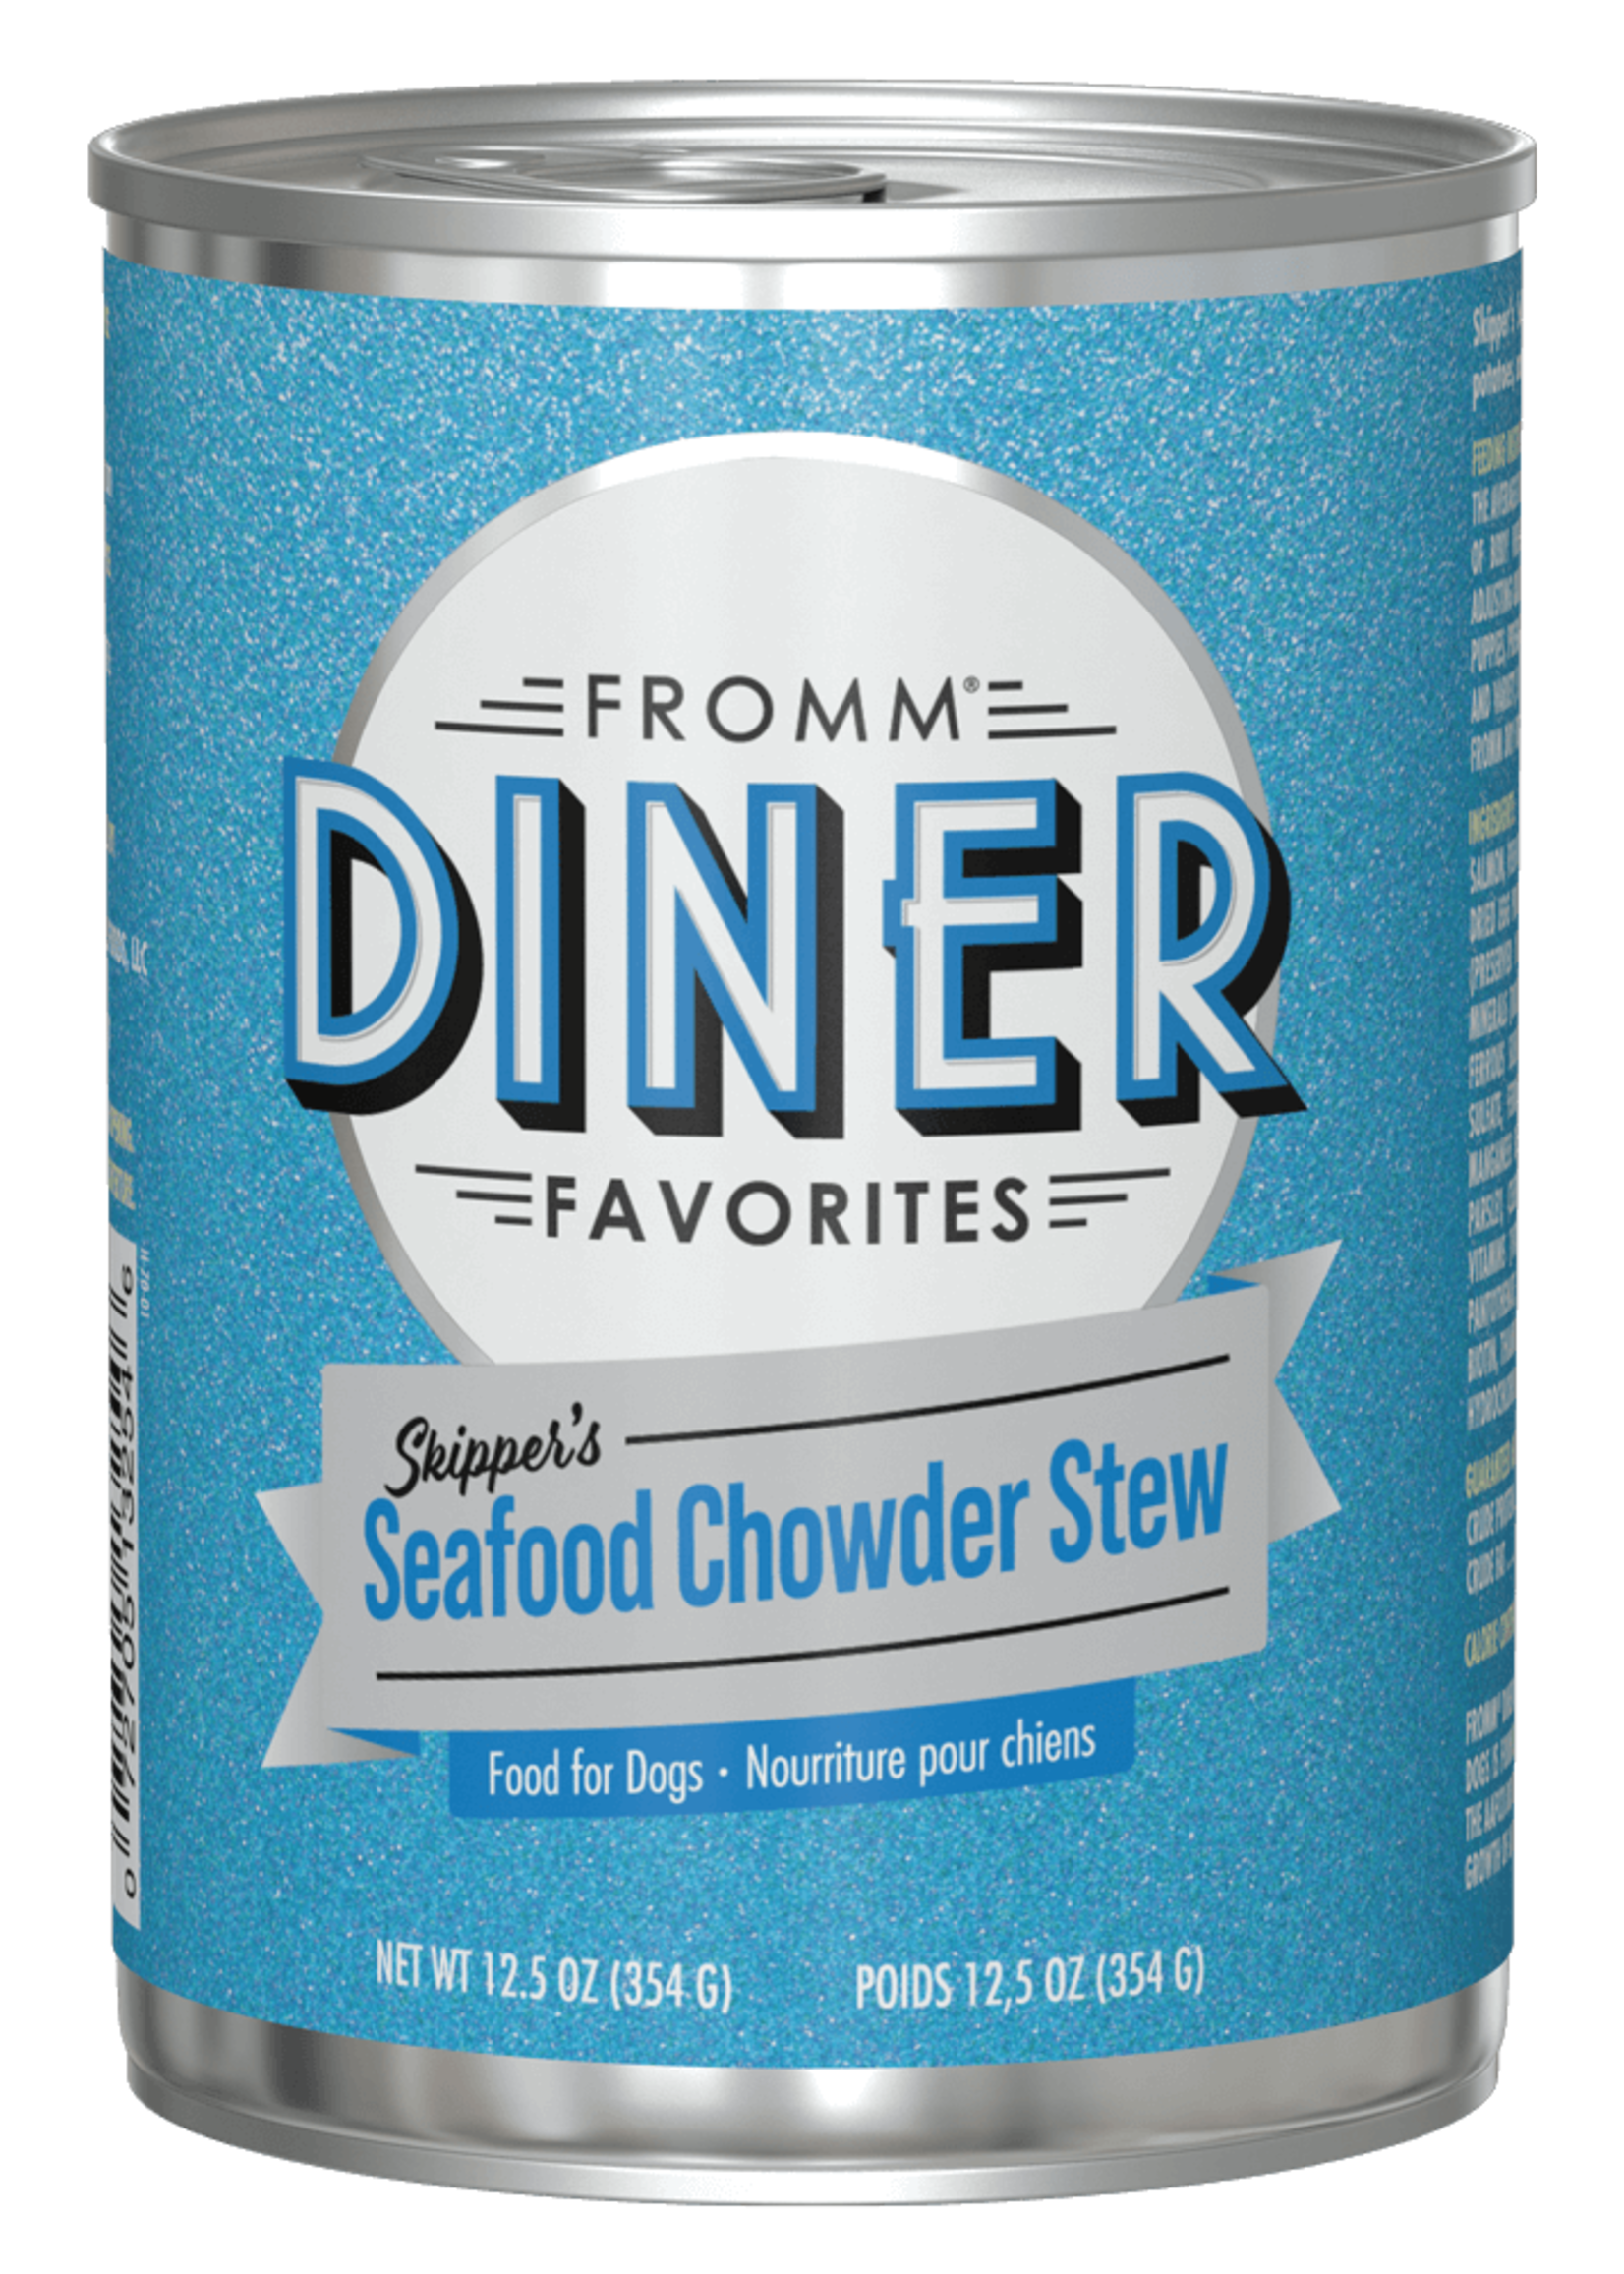 Fromm Family Pet Food Fromm Dog Diner Favorites Skipper's Seafood Chowder Stew 12.5 oz single